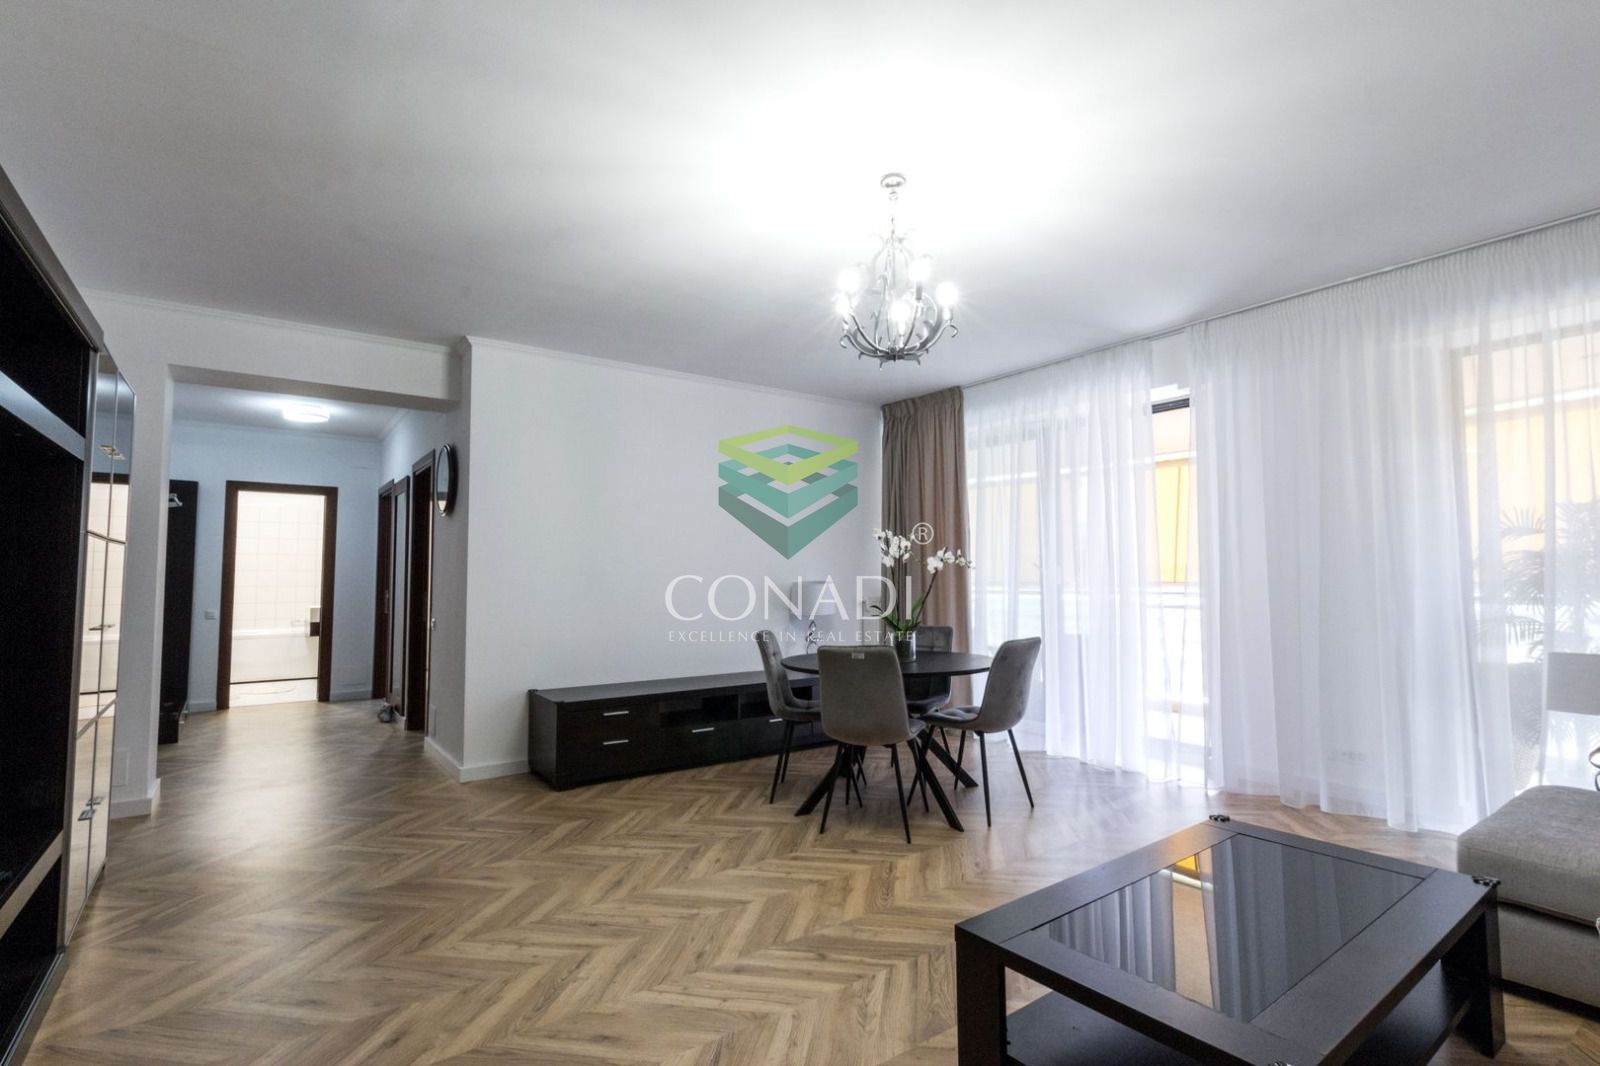 Apartment for sale with 3 rooms, parking space terrace, Circului Park